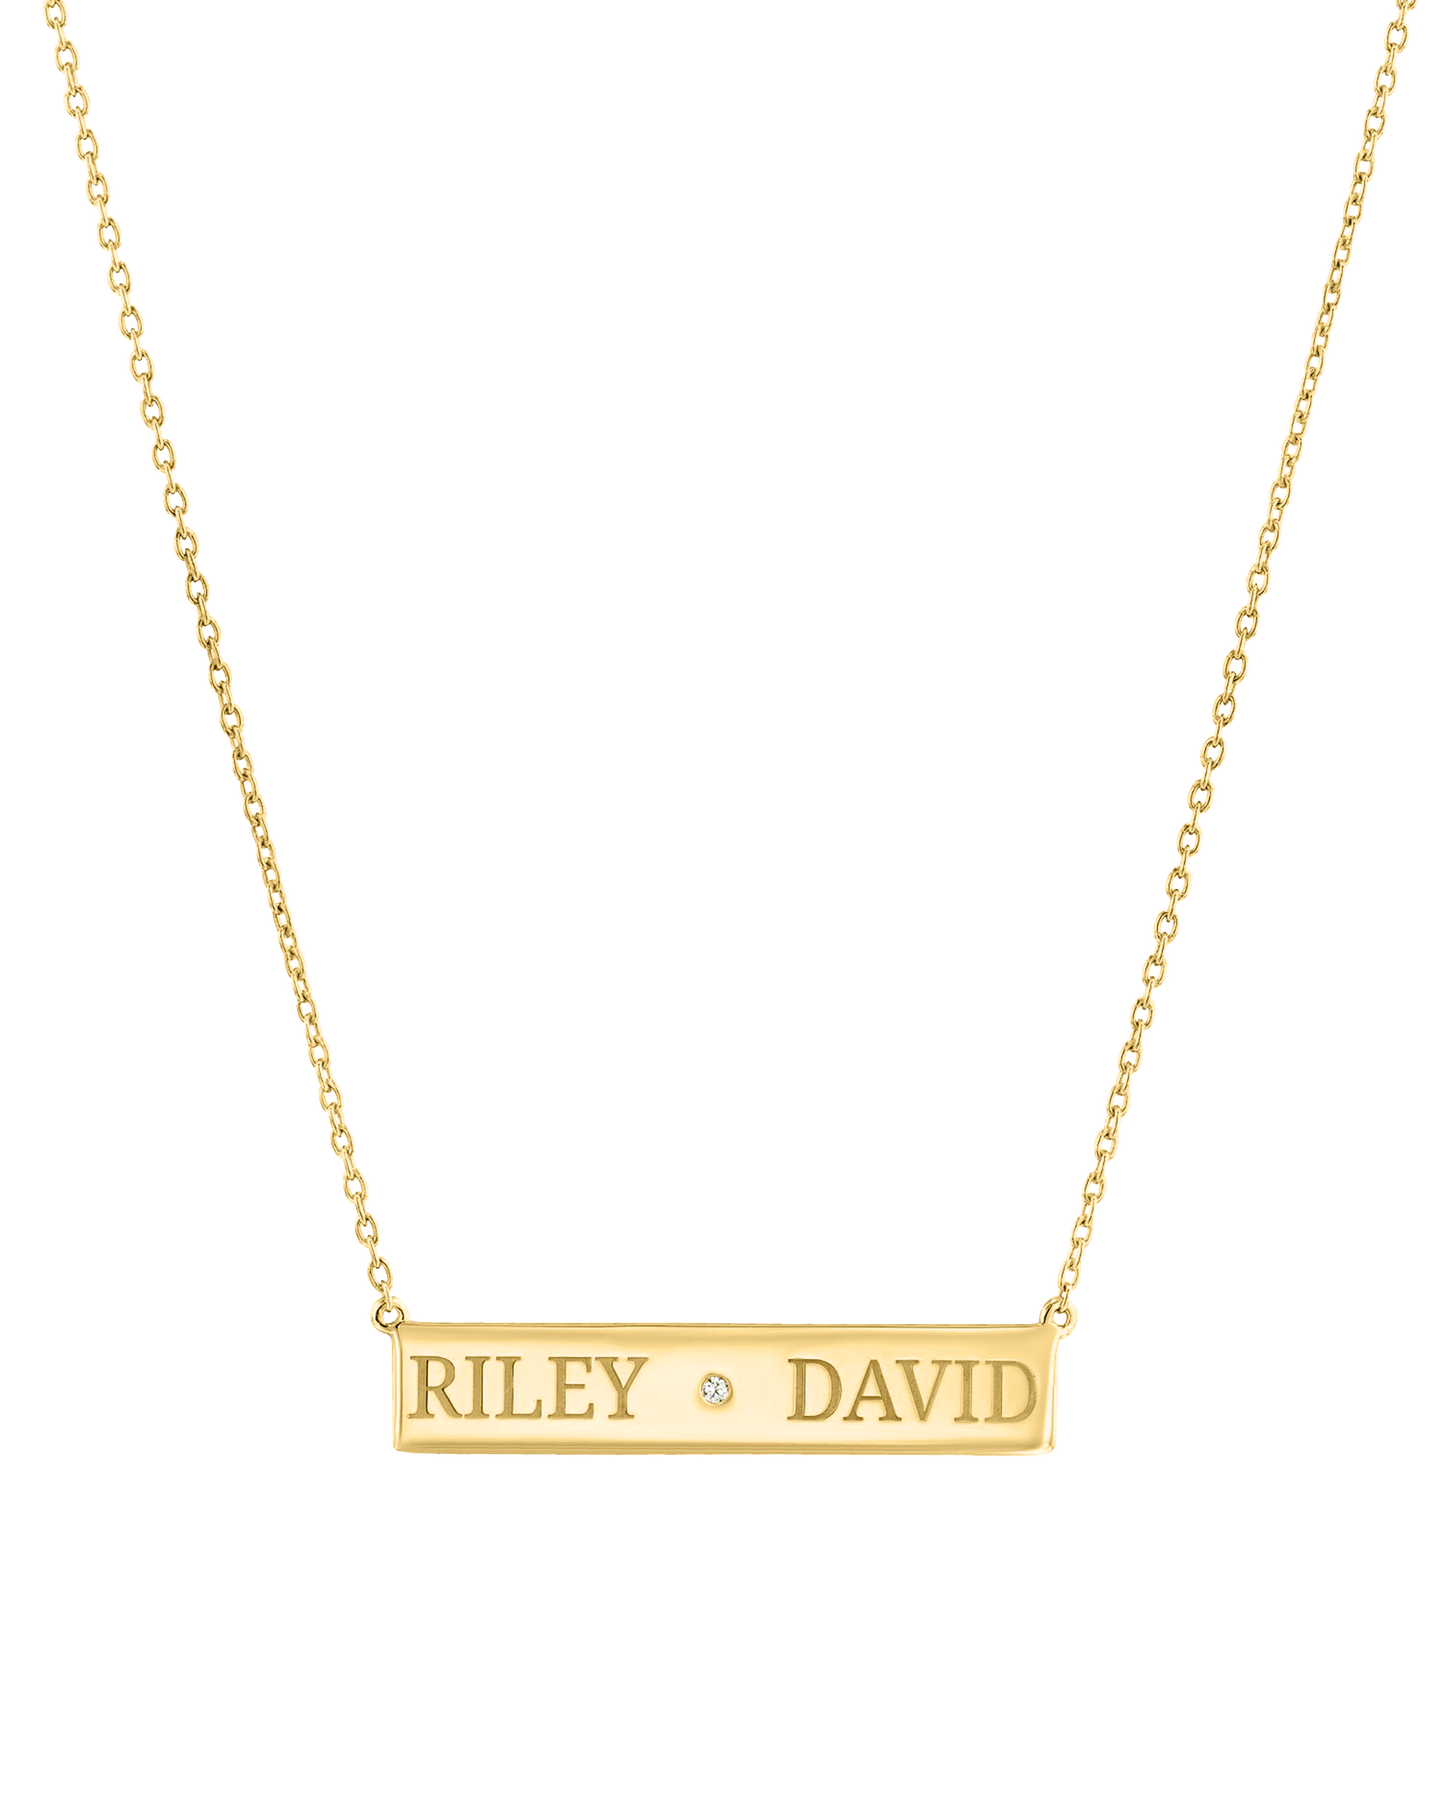 Just The Two Of Us Necklace - 18K Gold Vermeil Necklaces magal-dev 16" 